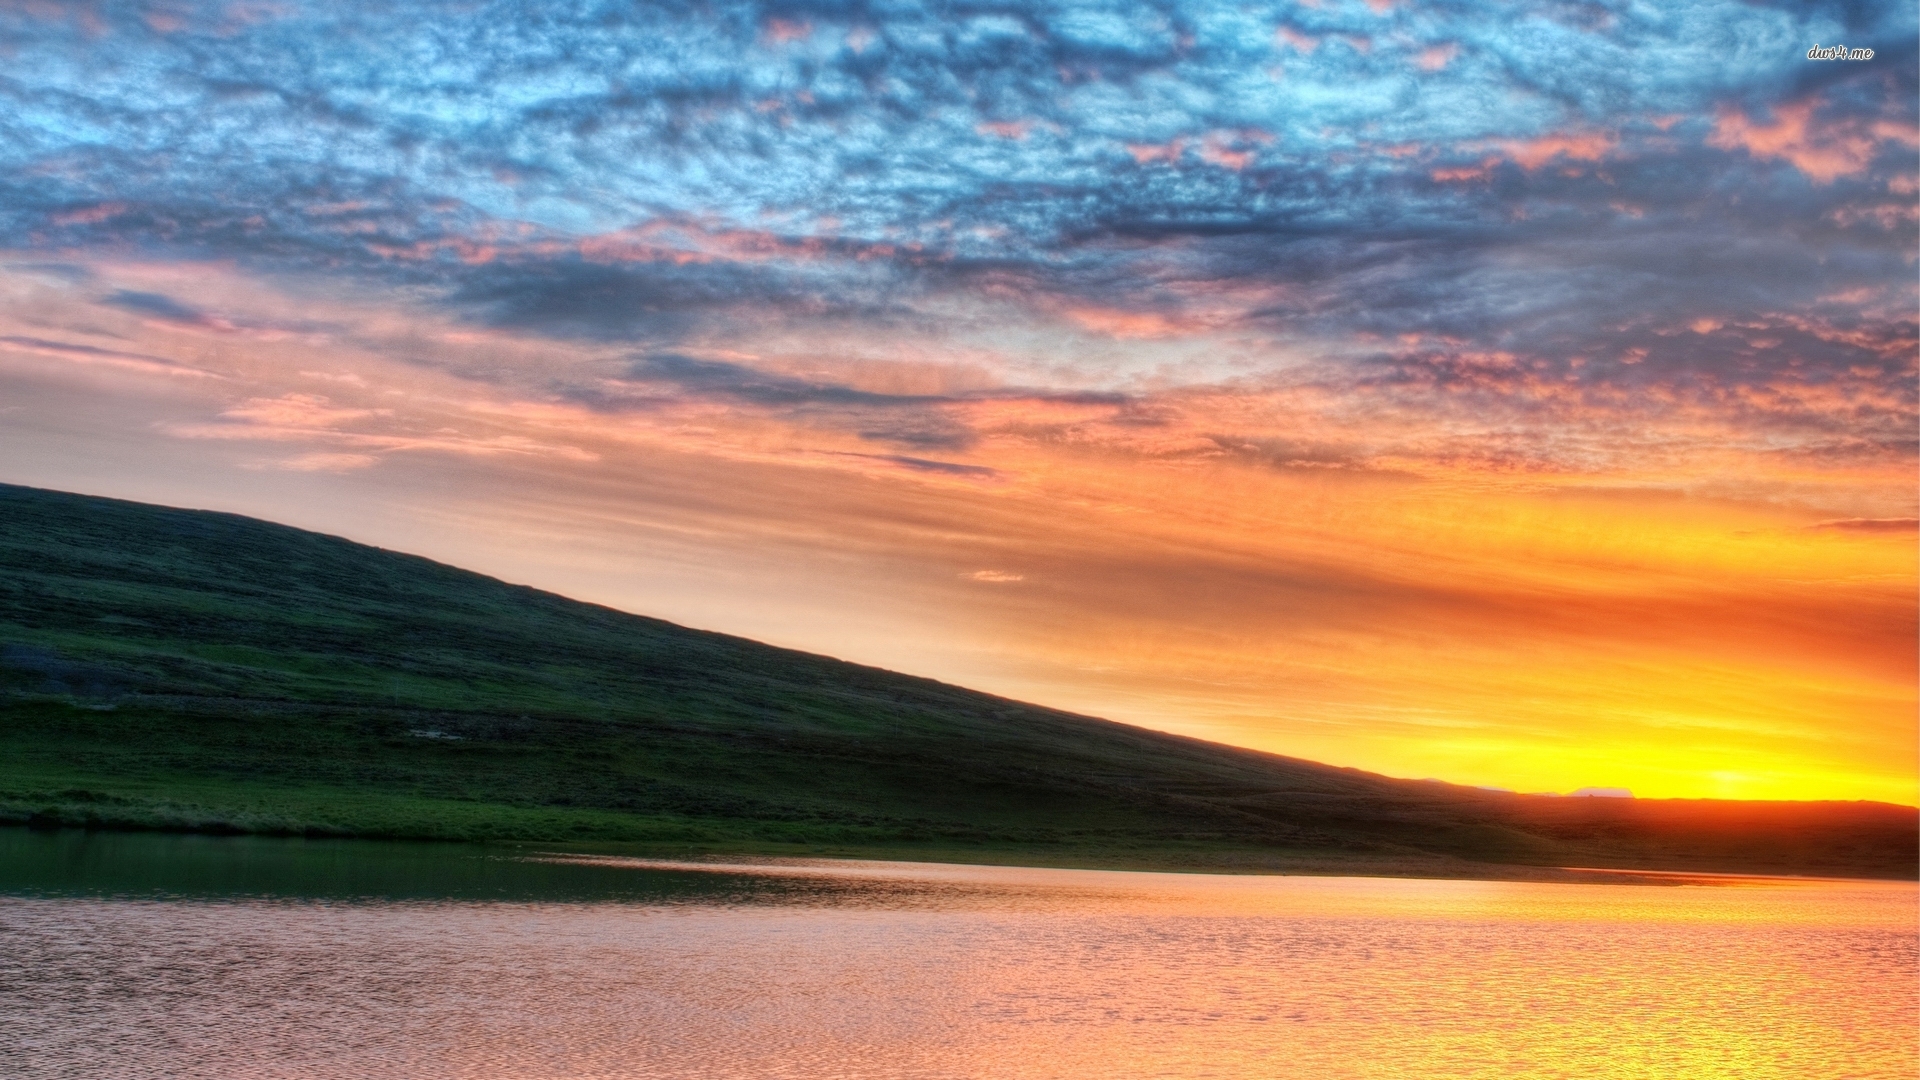 Golden sunrise behind the green hill by the lake wallpaper